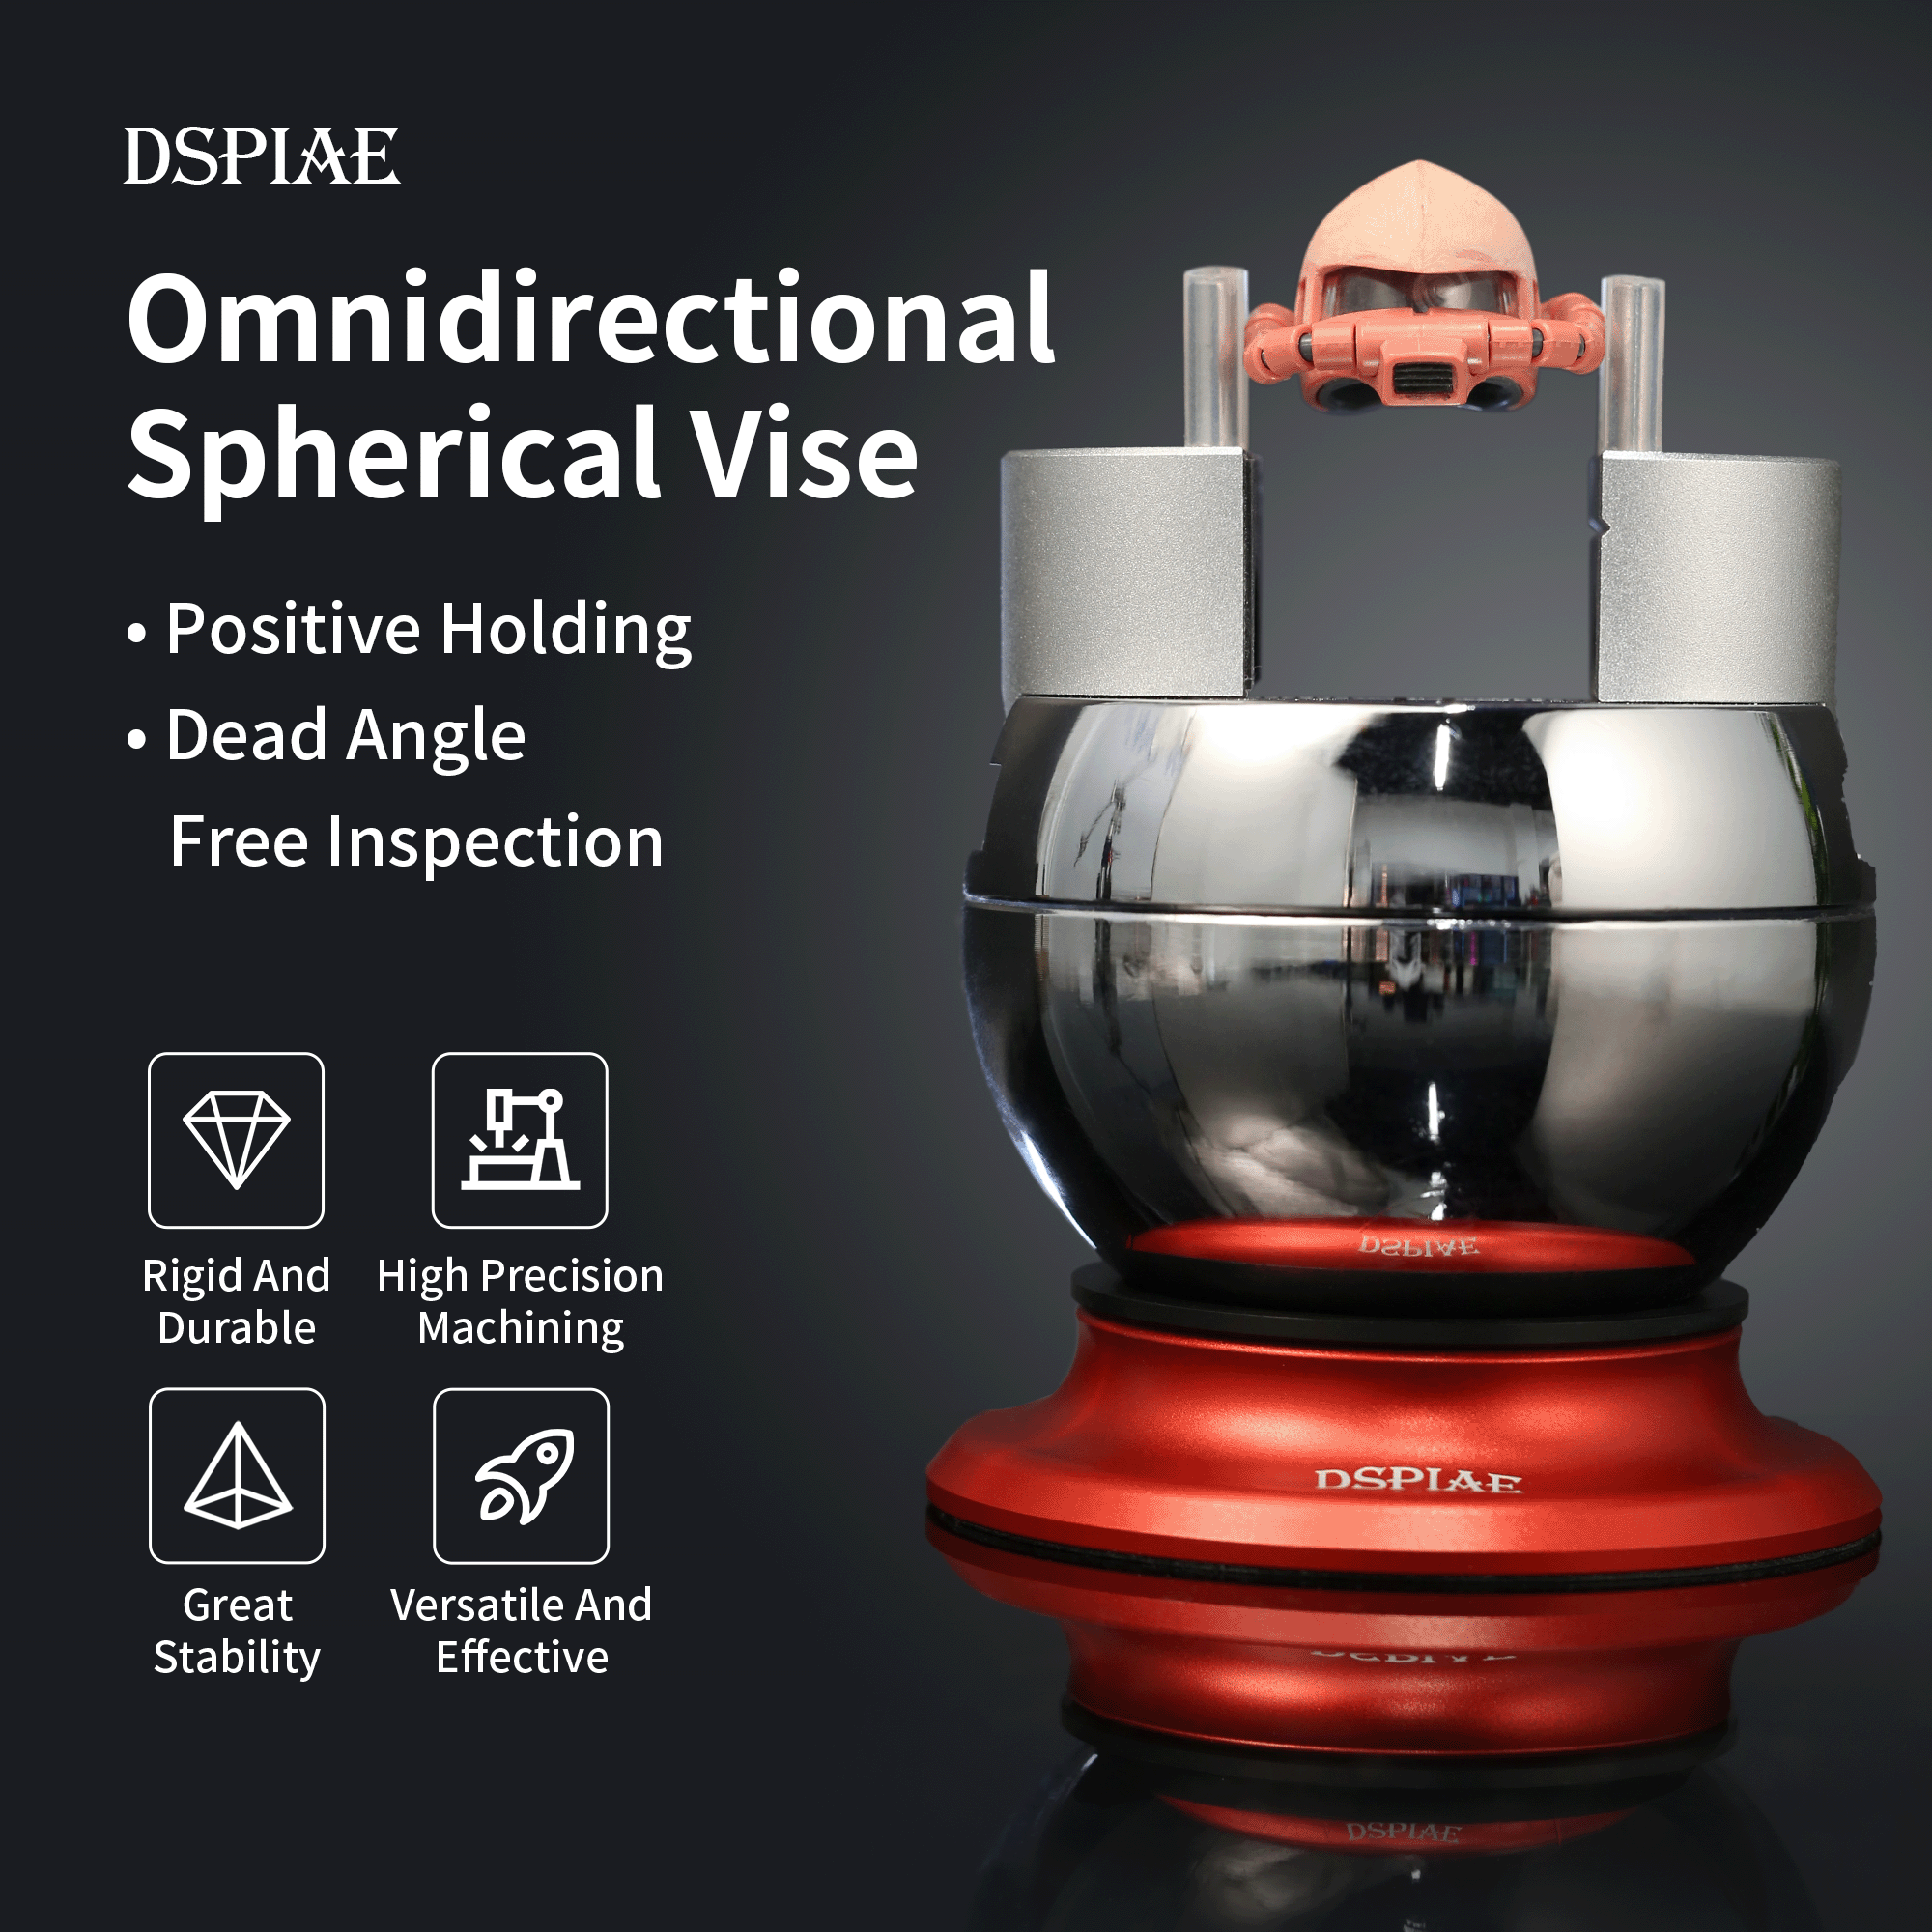 Dspiae AT-SV Omnidirectional Spherical Vice